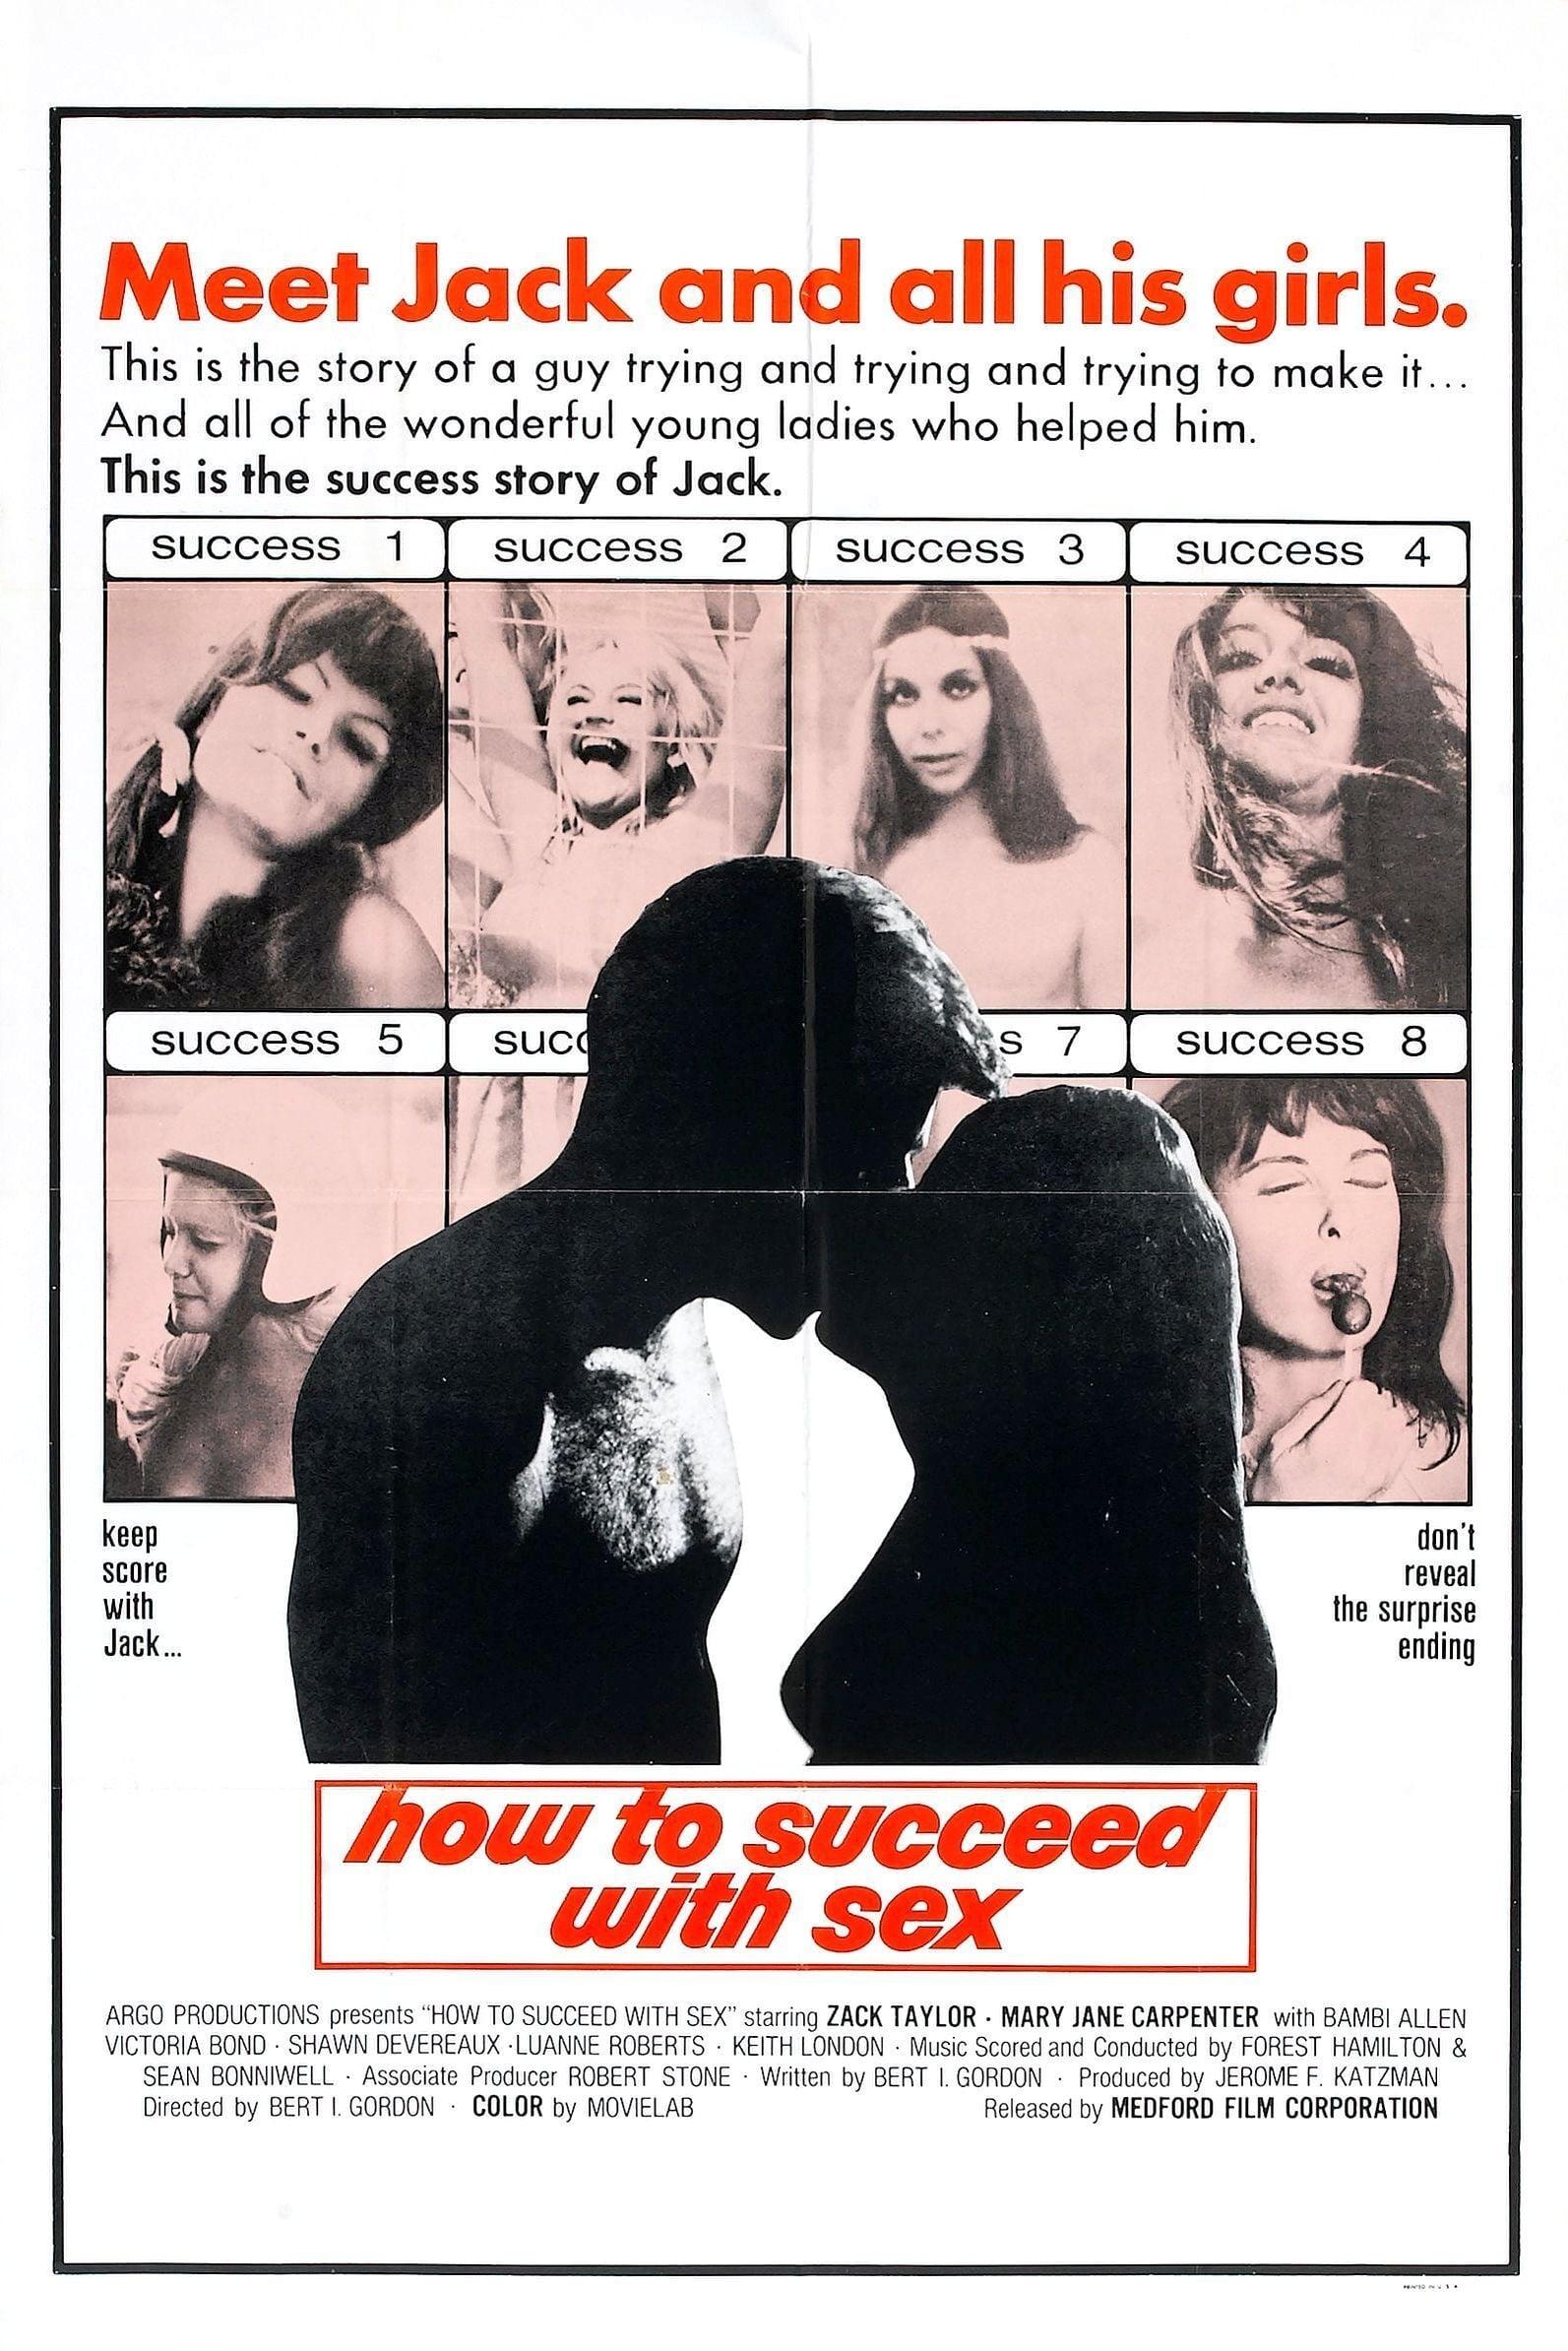 How to Succeed with Sex poster